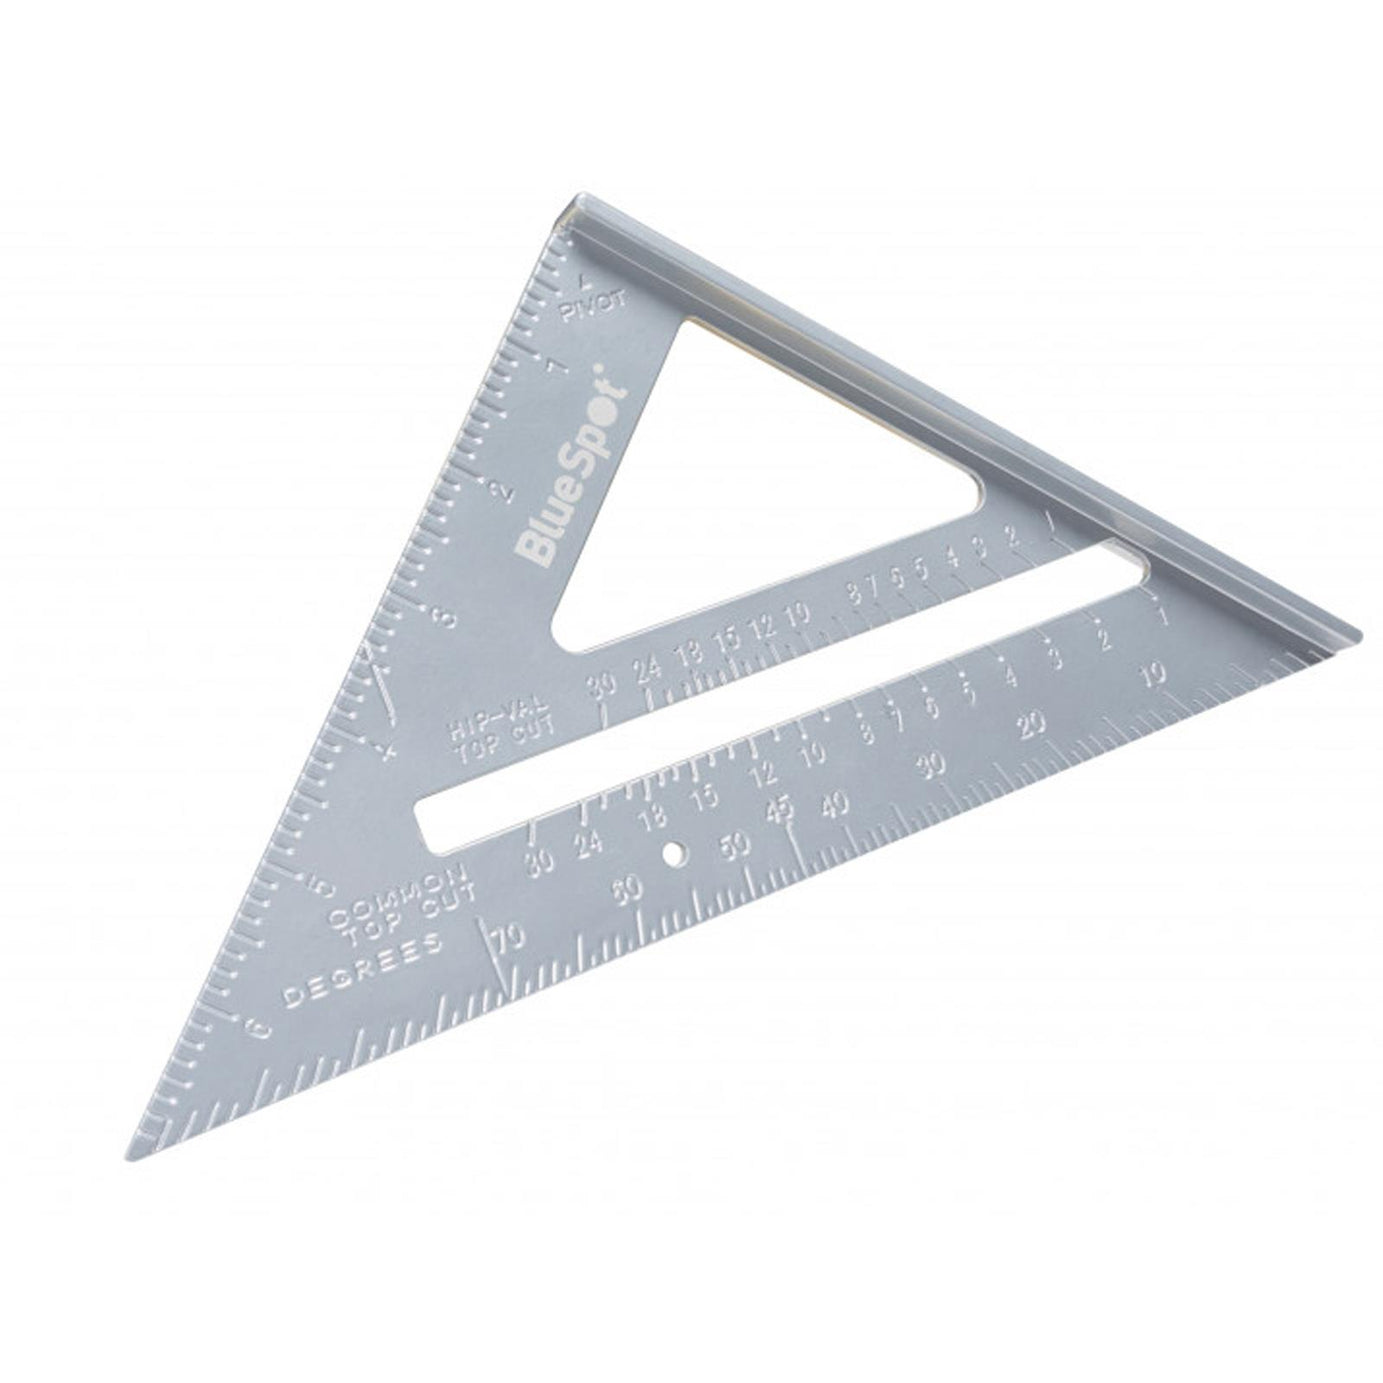 BlueSpot 150mm 6" Aluminium Speed Square Roofing Rafter Angle Measure Guide